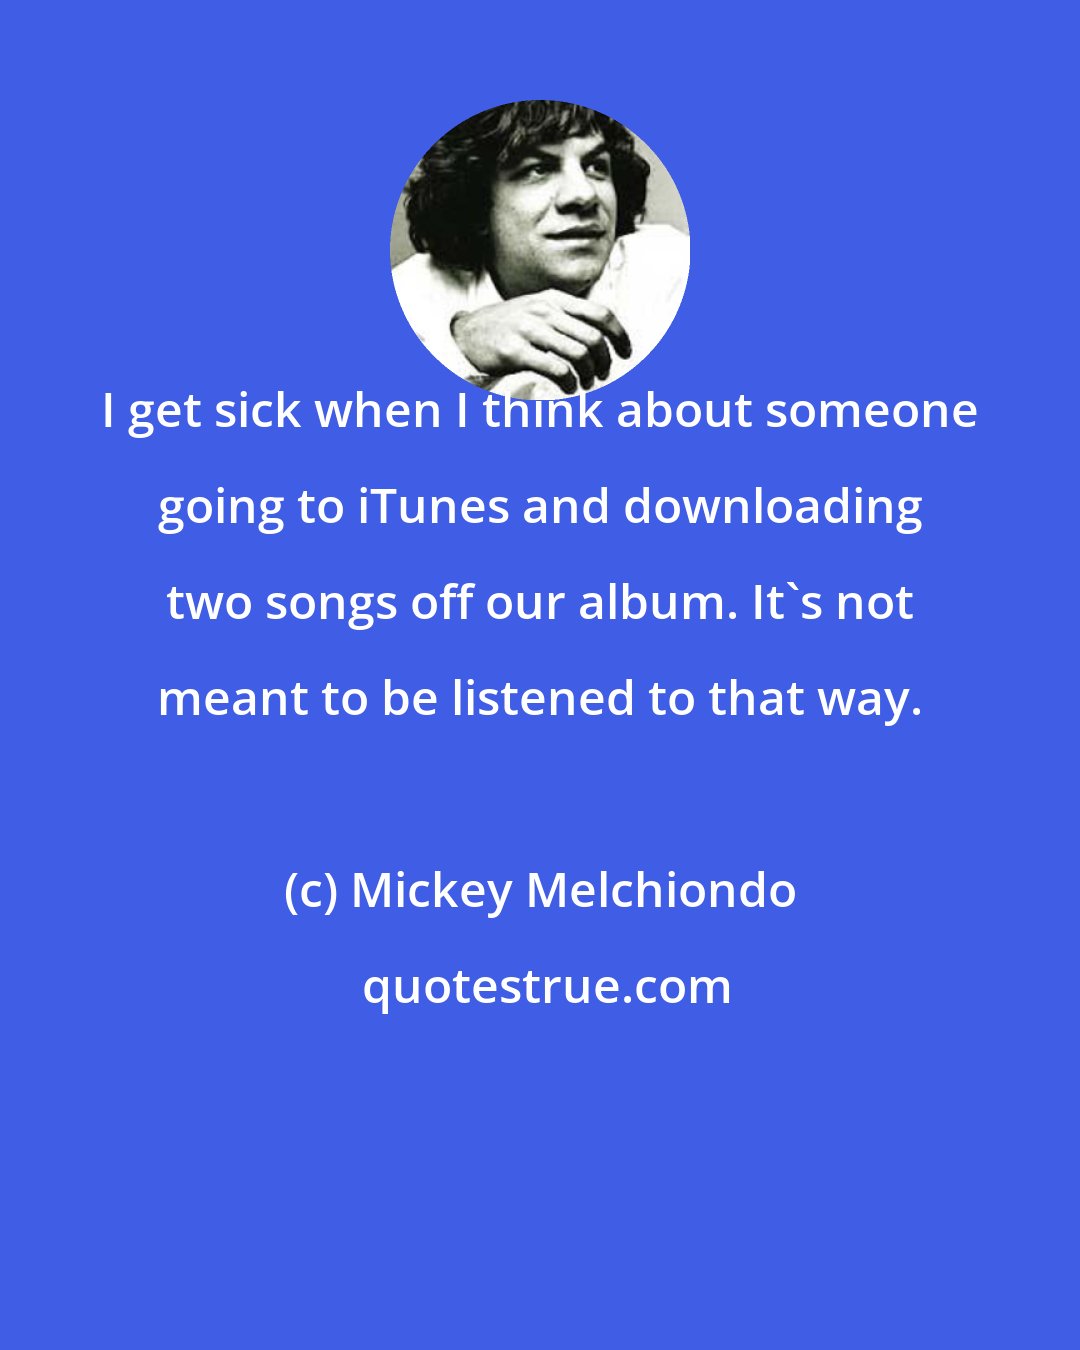 Mickey Melchiondo: I get sick when I think about someone going to iTunes and downloading two songs off our album. It's not meant to be listened to that way.